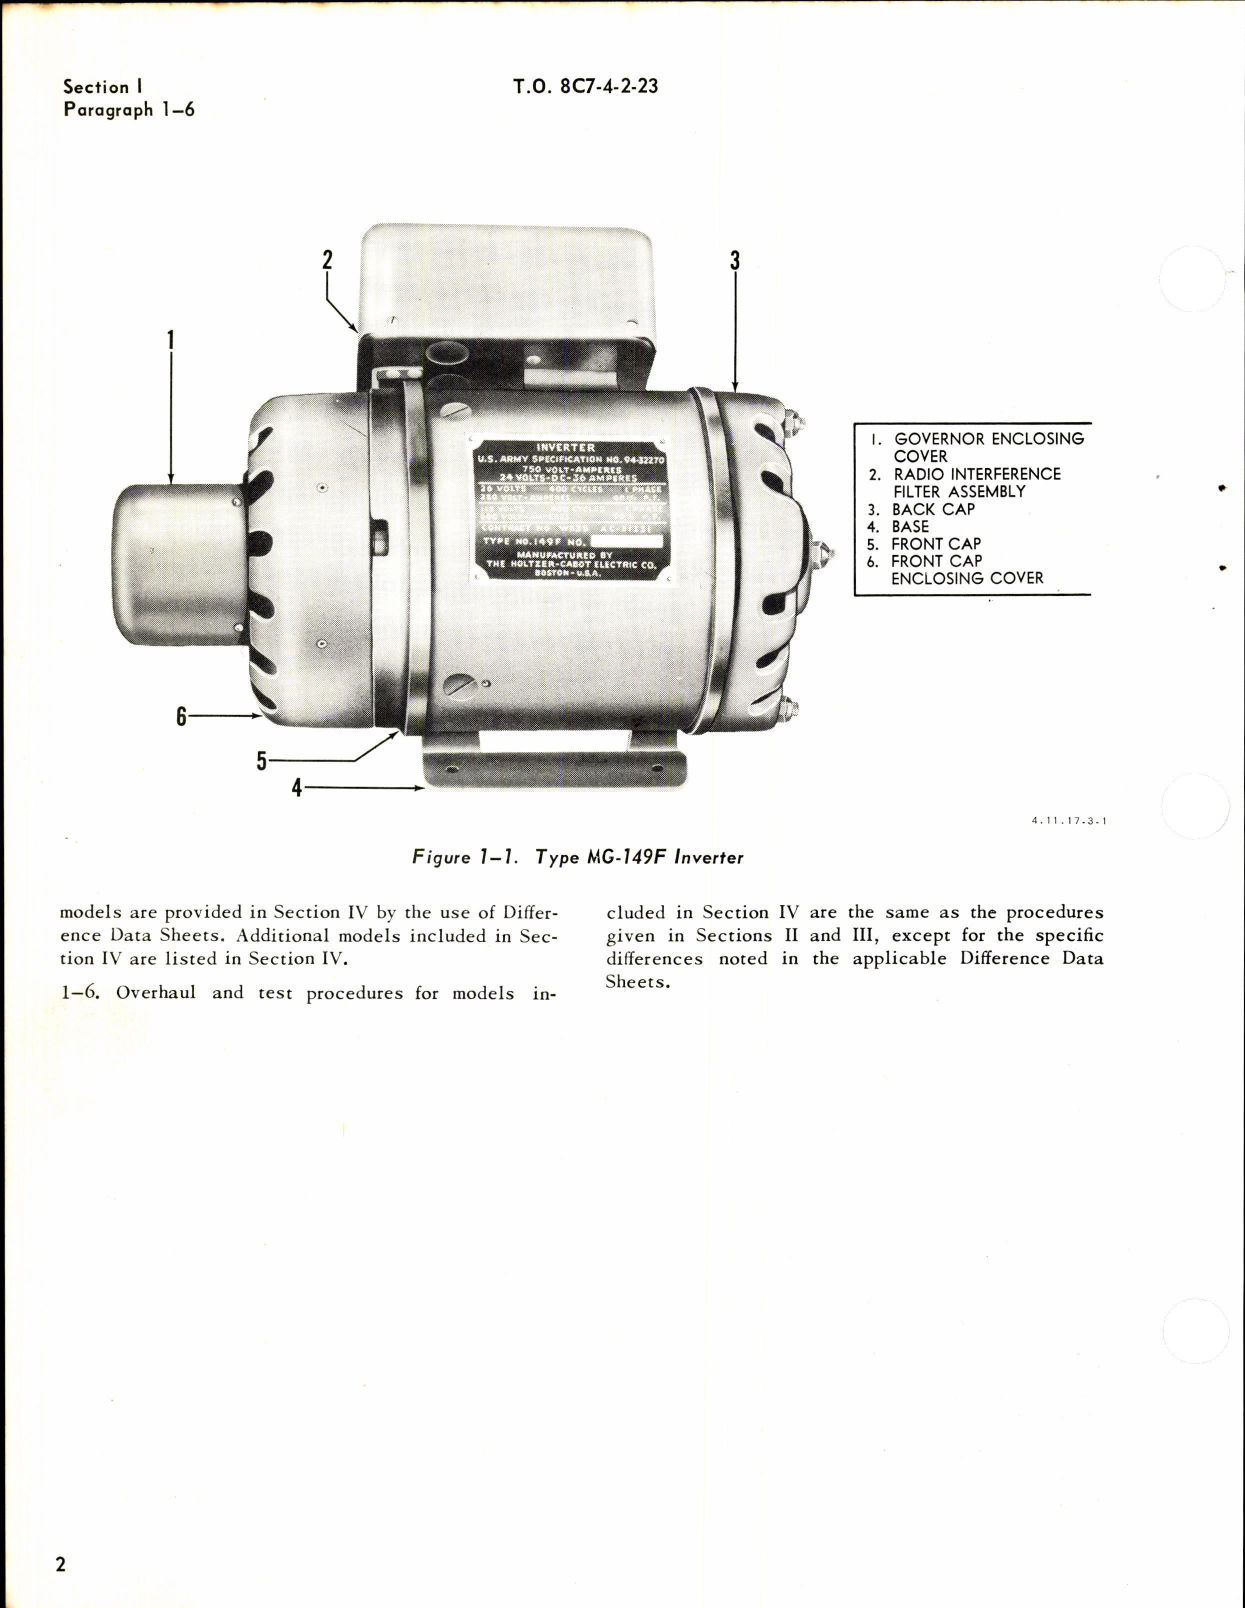 Sample page 4 from AirCorps Library document: Instructions for Inverters Types MG-149F & MG-146H